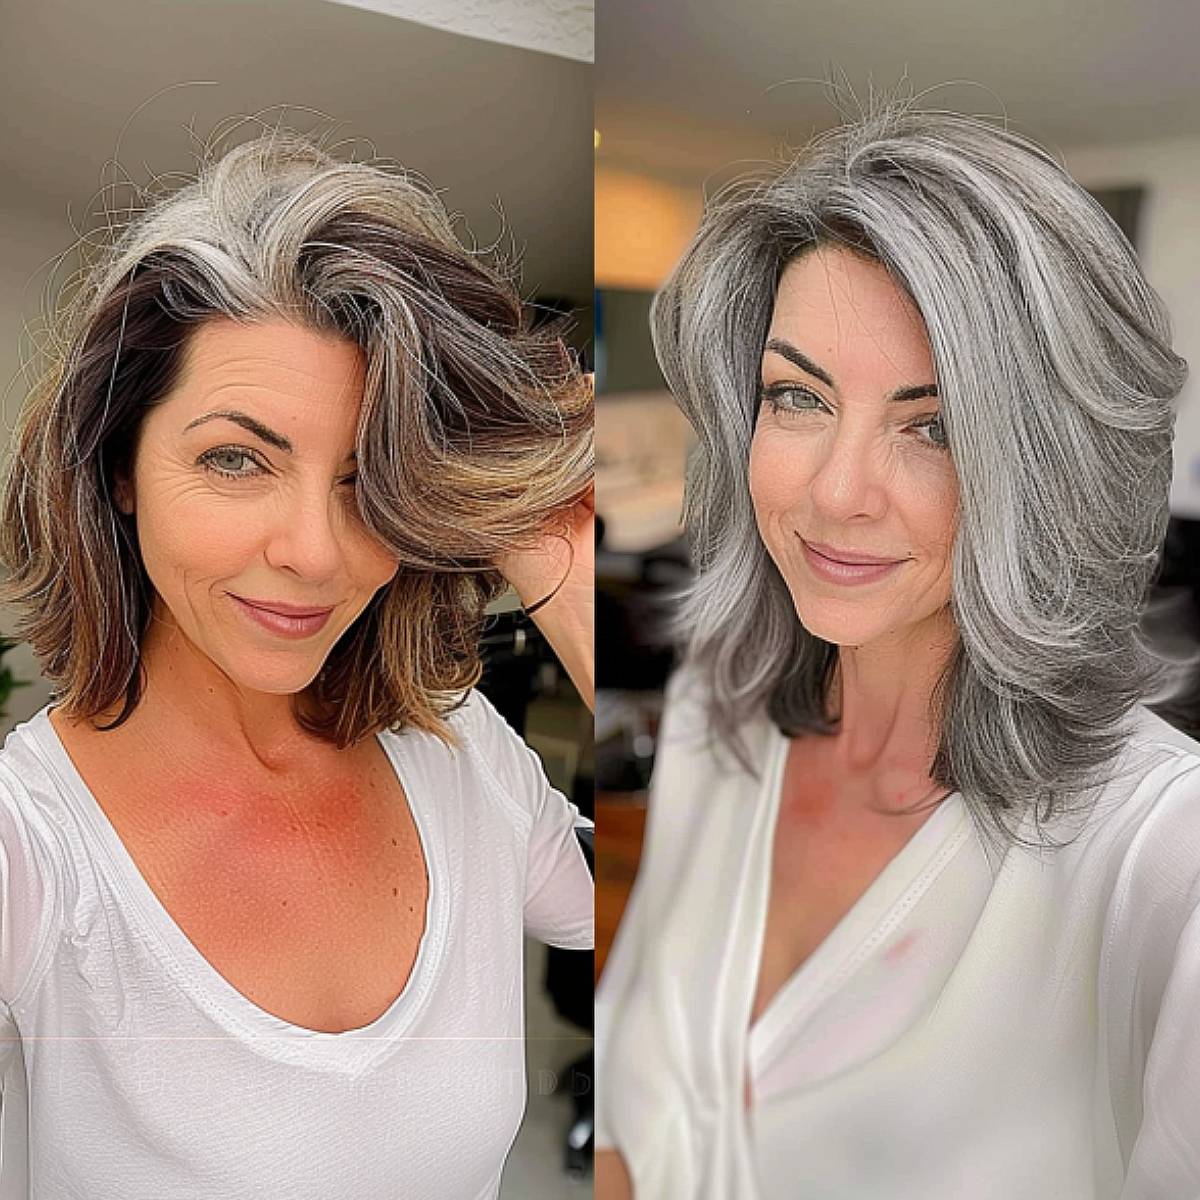 Going Gray Early: Why It Happens, and Why It's NBD